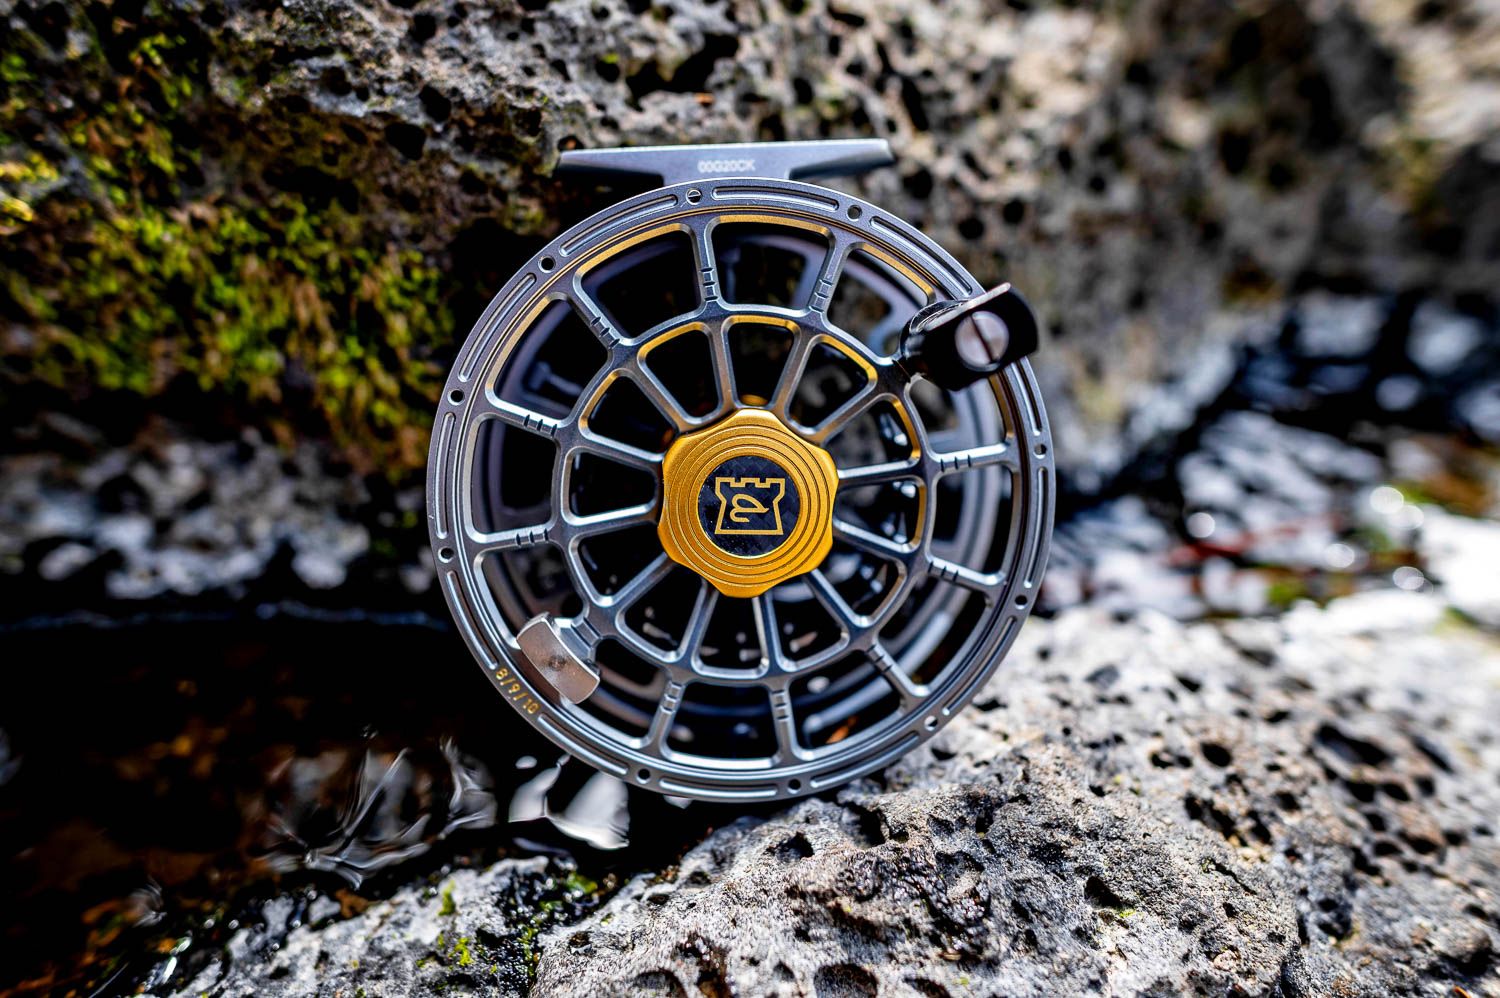 Hardy Zane Carbon Fly Reel - Size 12000 (12+) - NEW - Free Fly